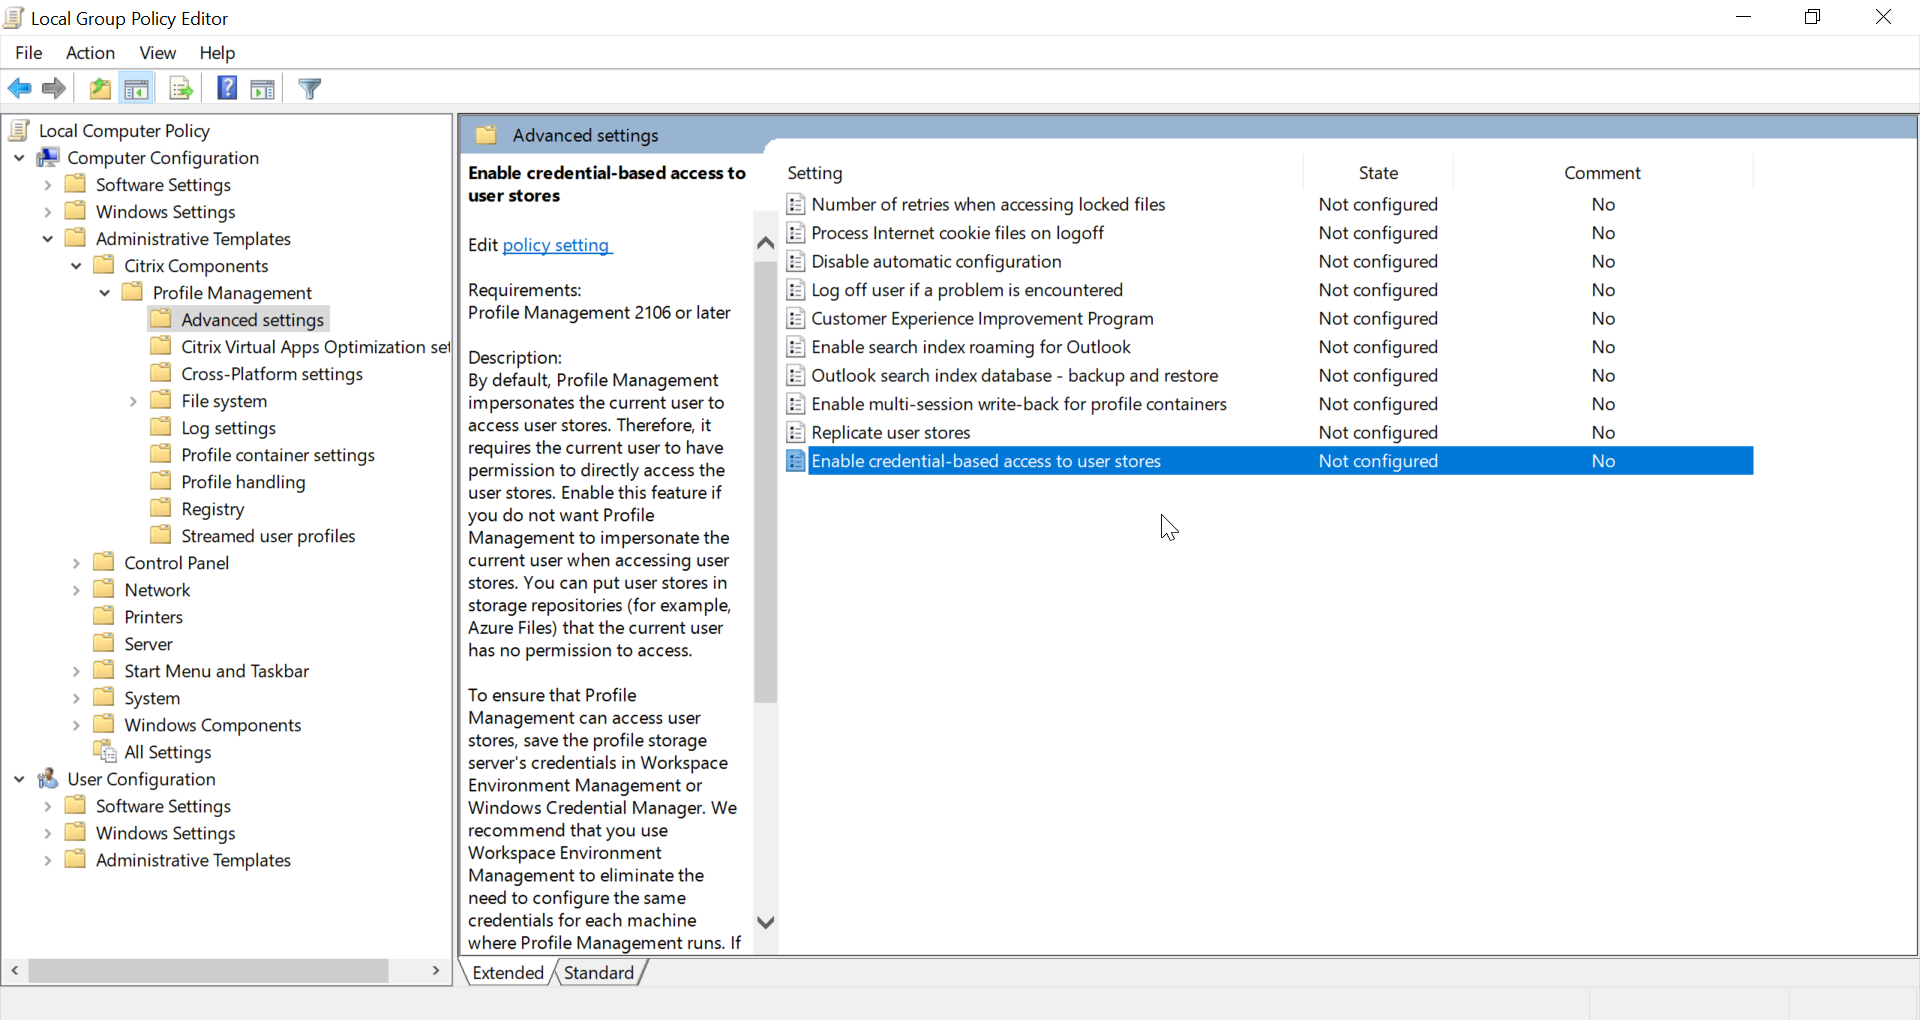 The Enable credential-based access to user stores policy in the Local Group Policy Editor